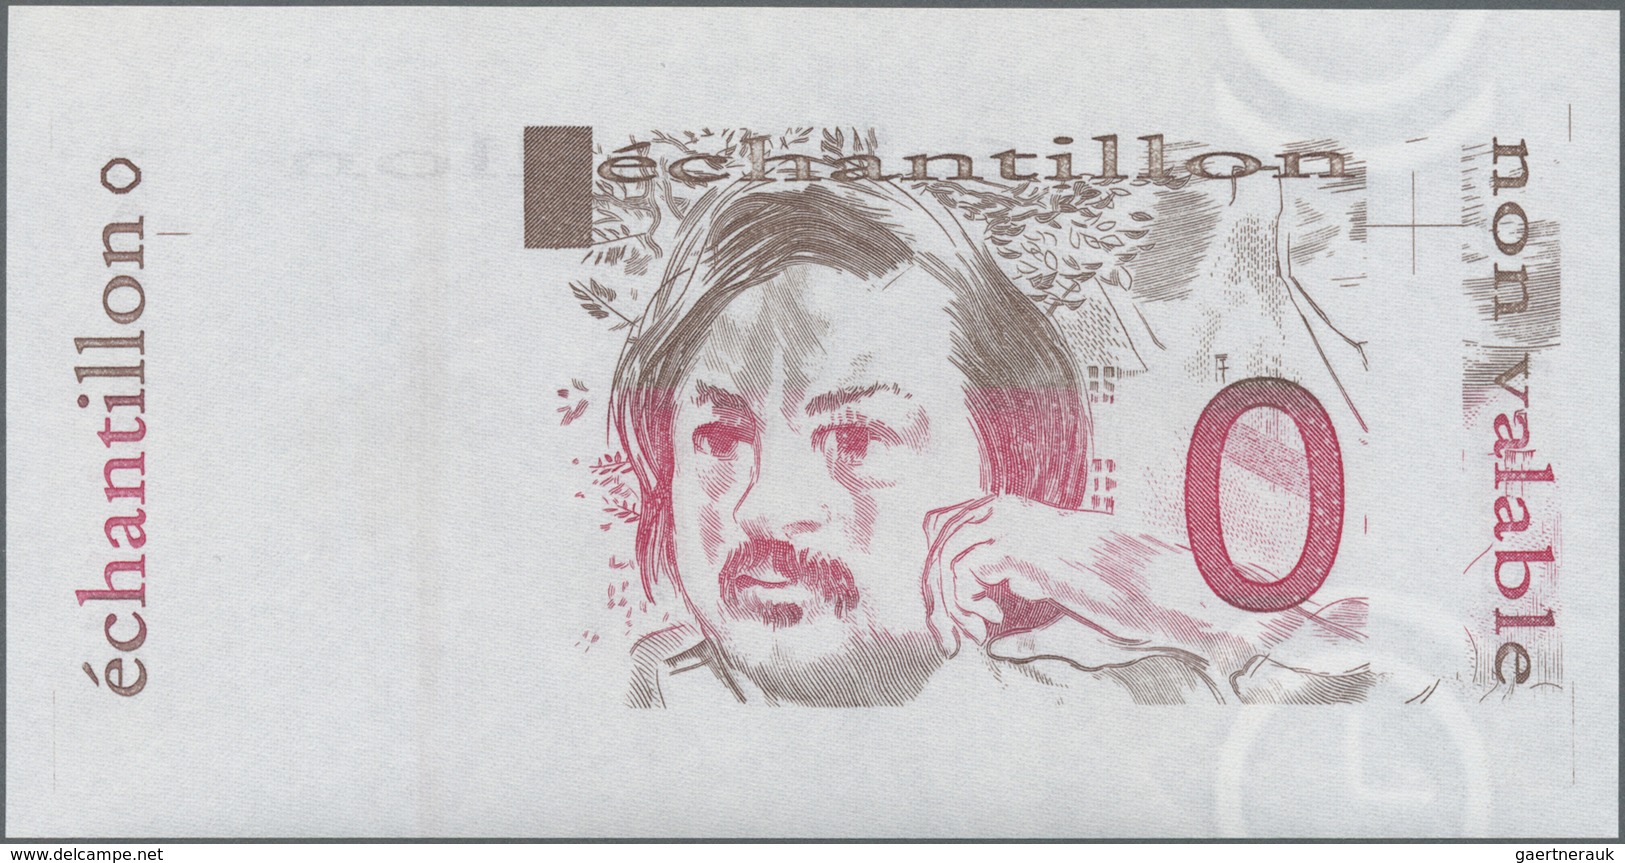 Testbanknoten: France: Rare Proof Print Of An Echantillon Designed By The BDF And Printed On Banknot - Specimen